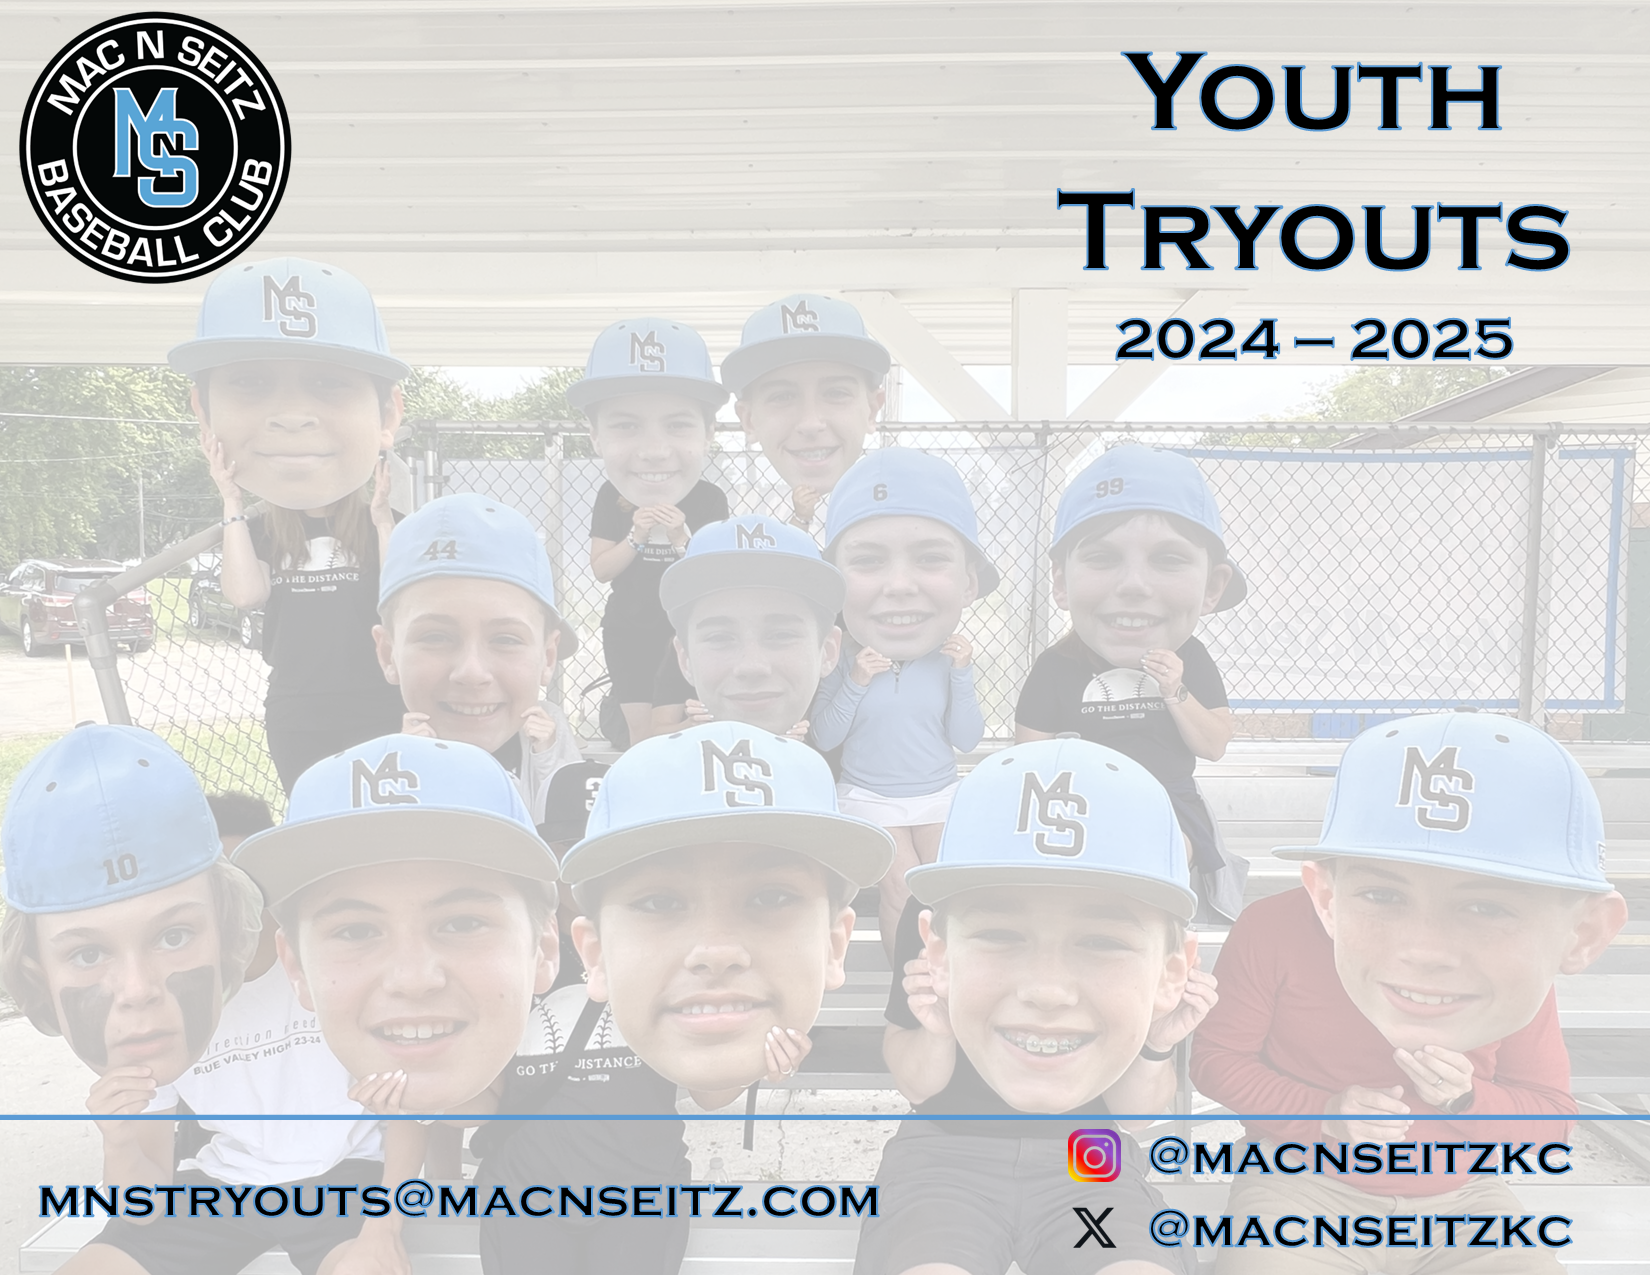 MNS_Youth Tryouts_2024-2025